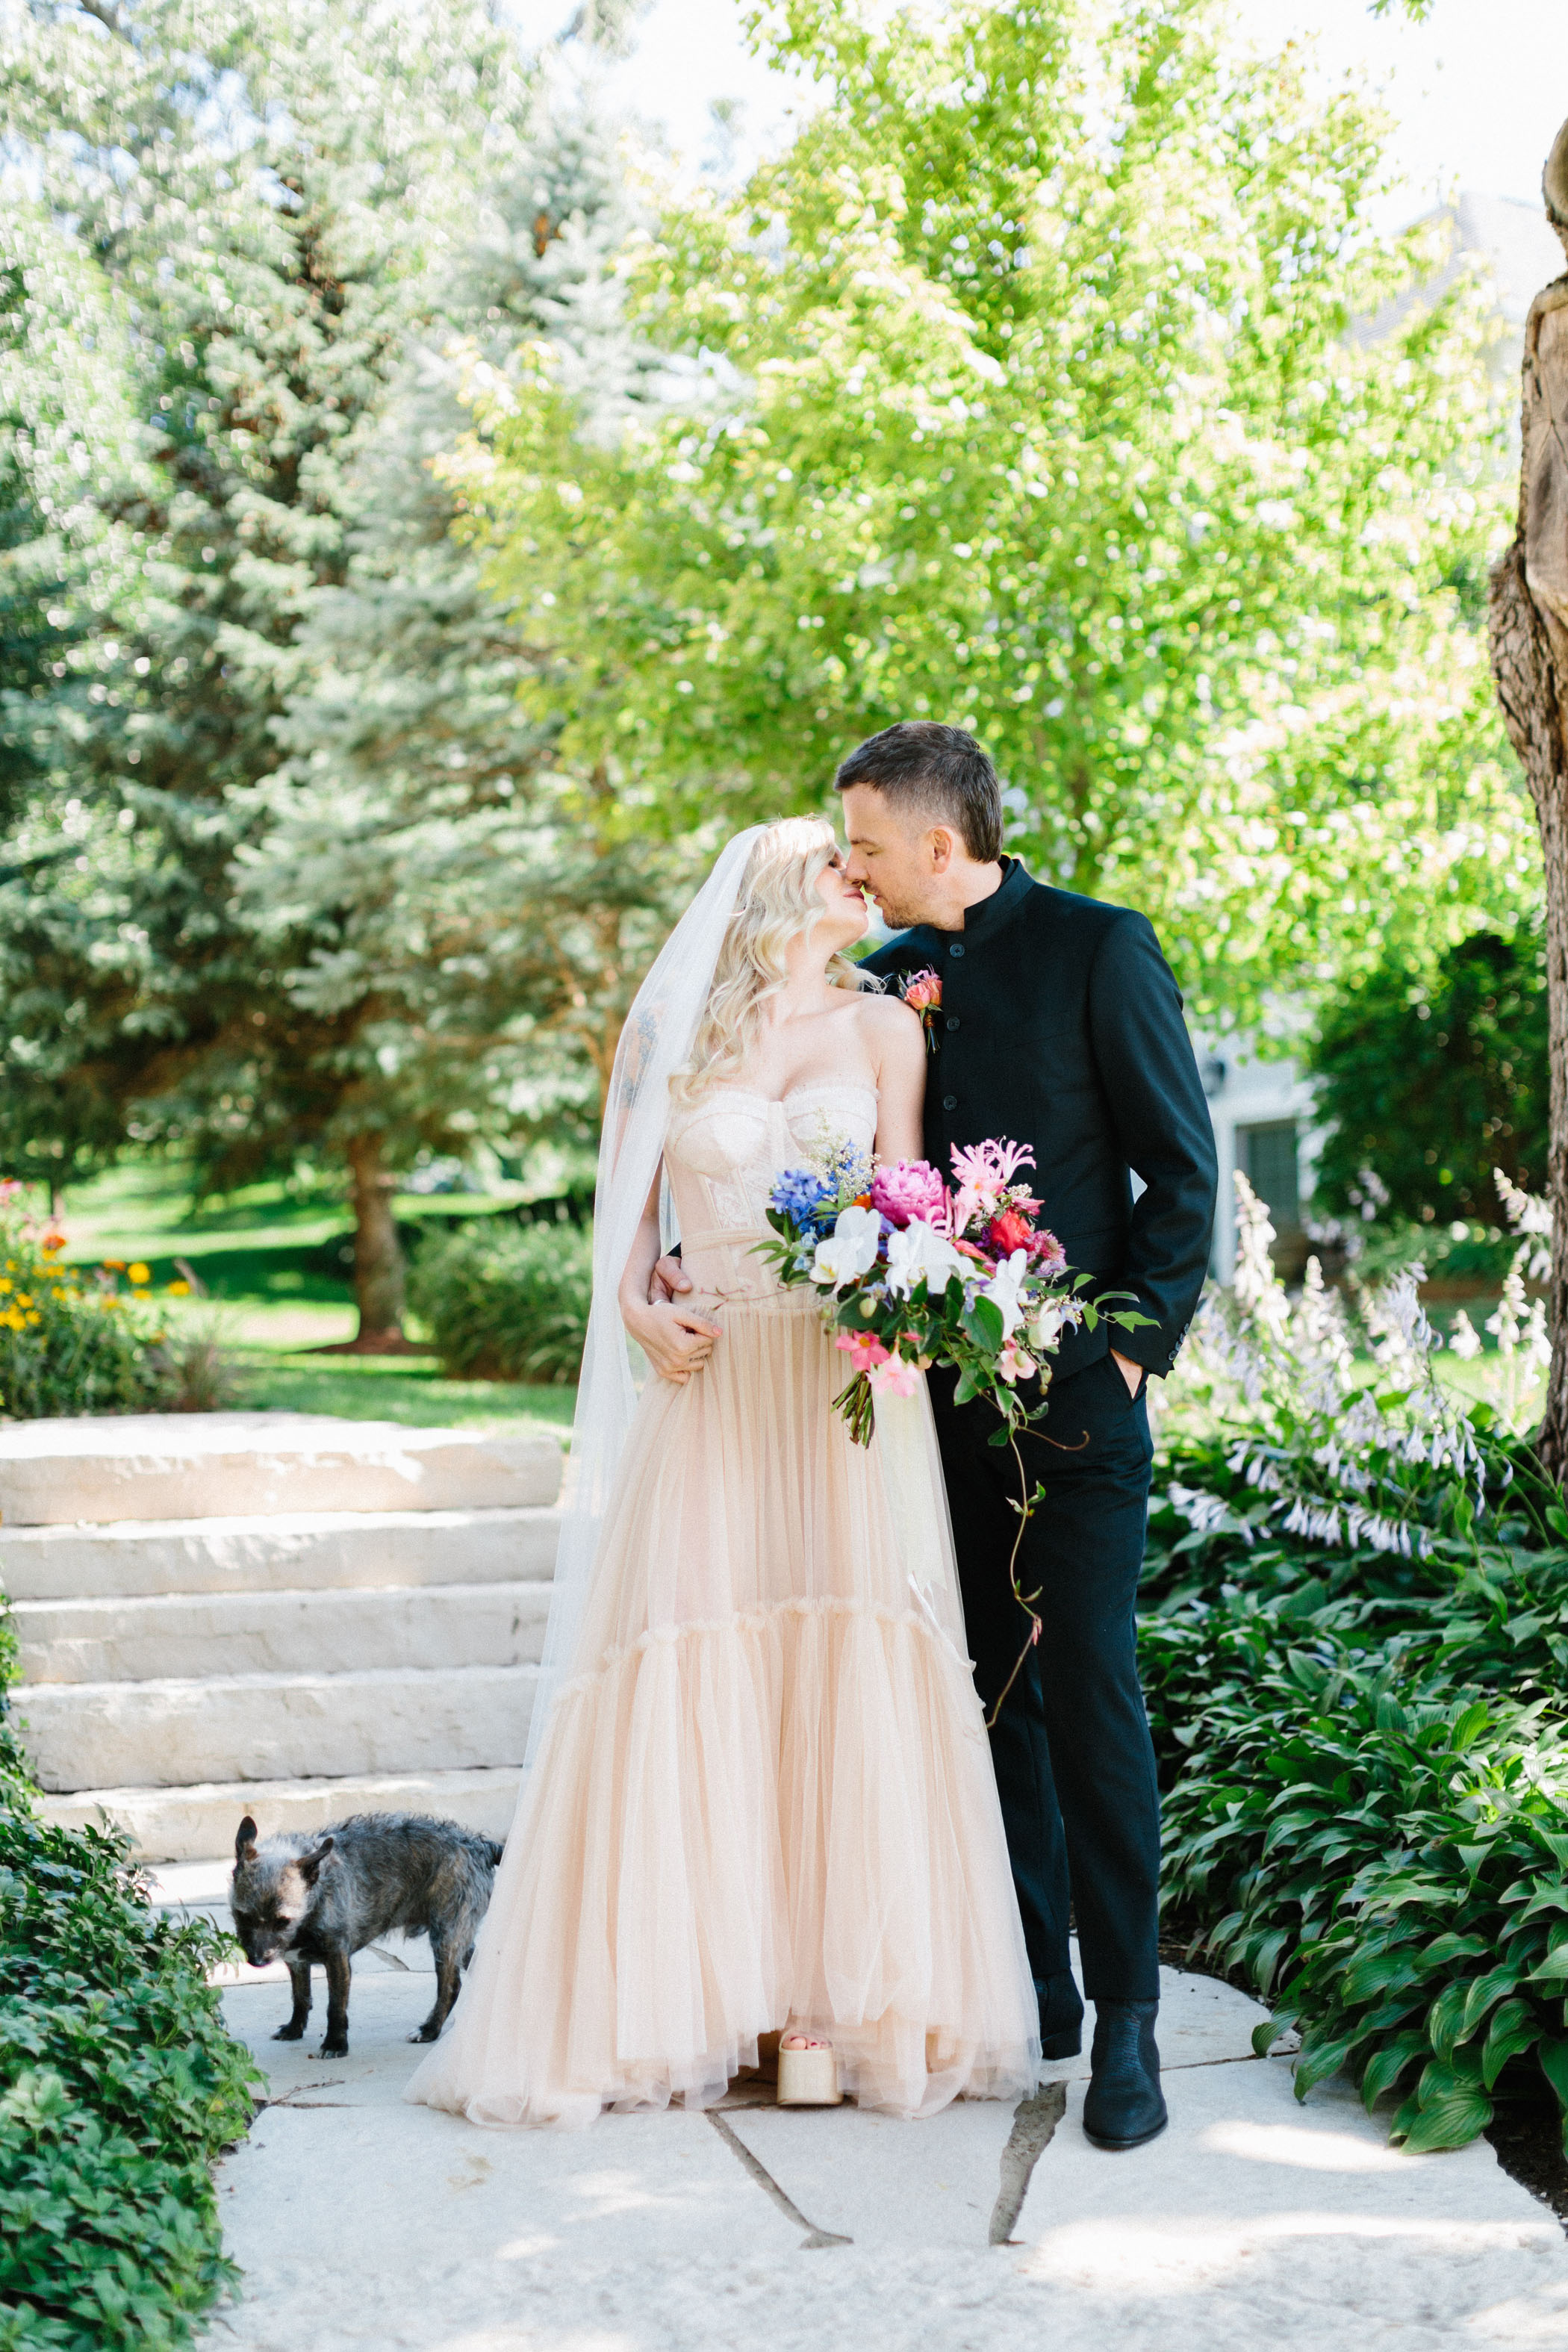 A Celebrity Lakeside Wedding in Wisconsin with a Transformed Boathouse